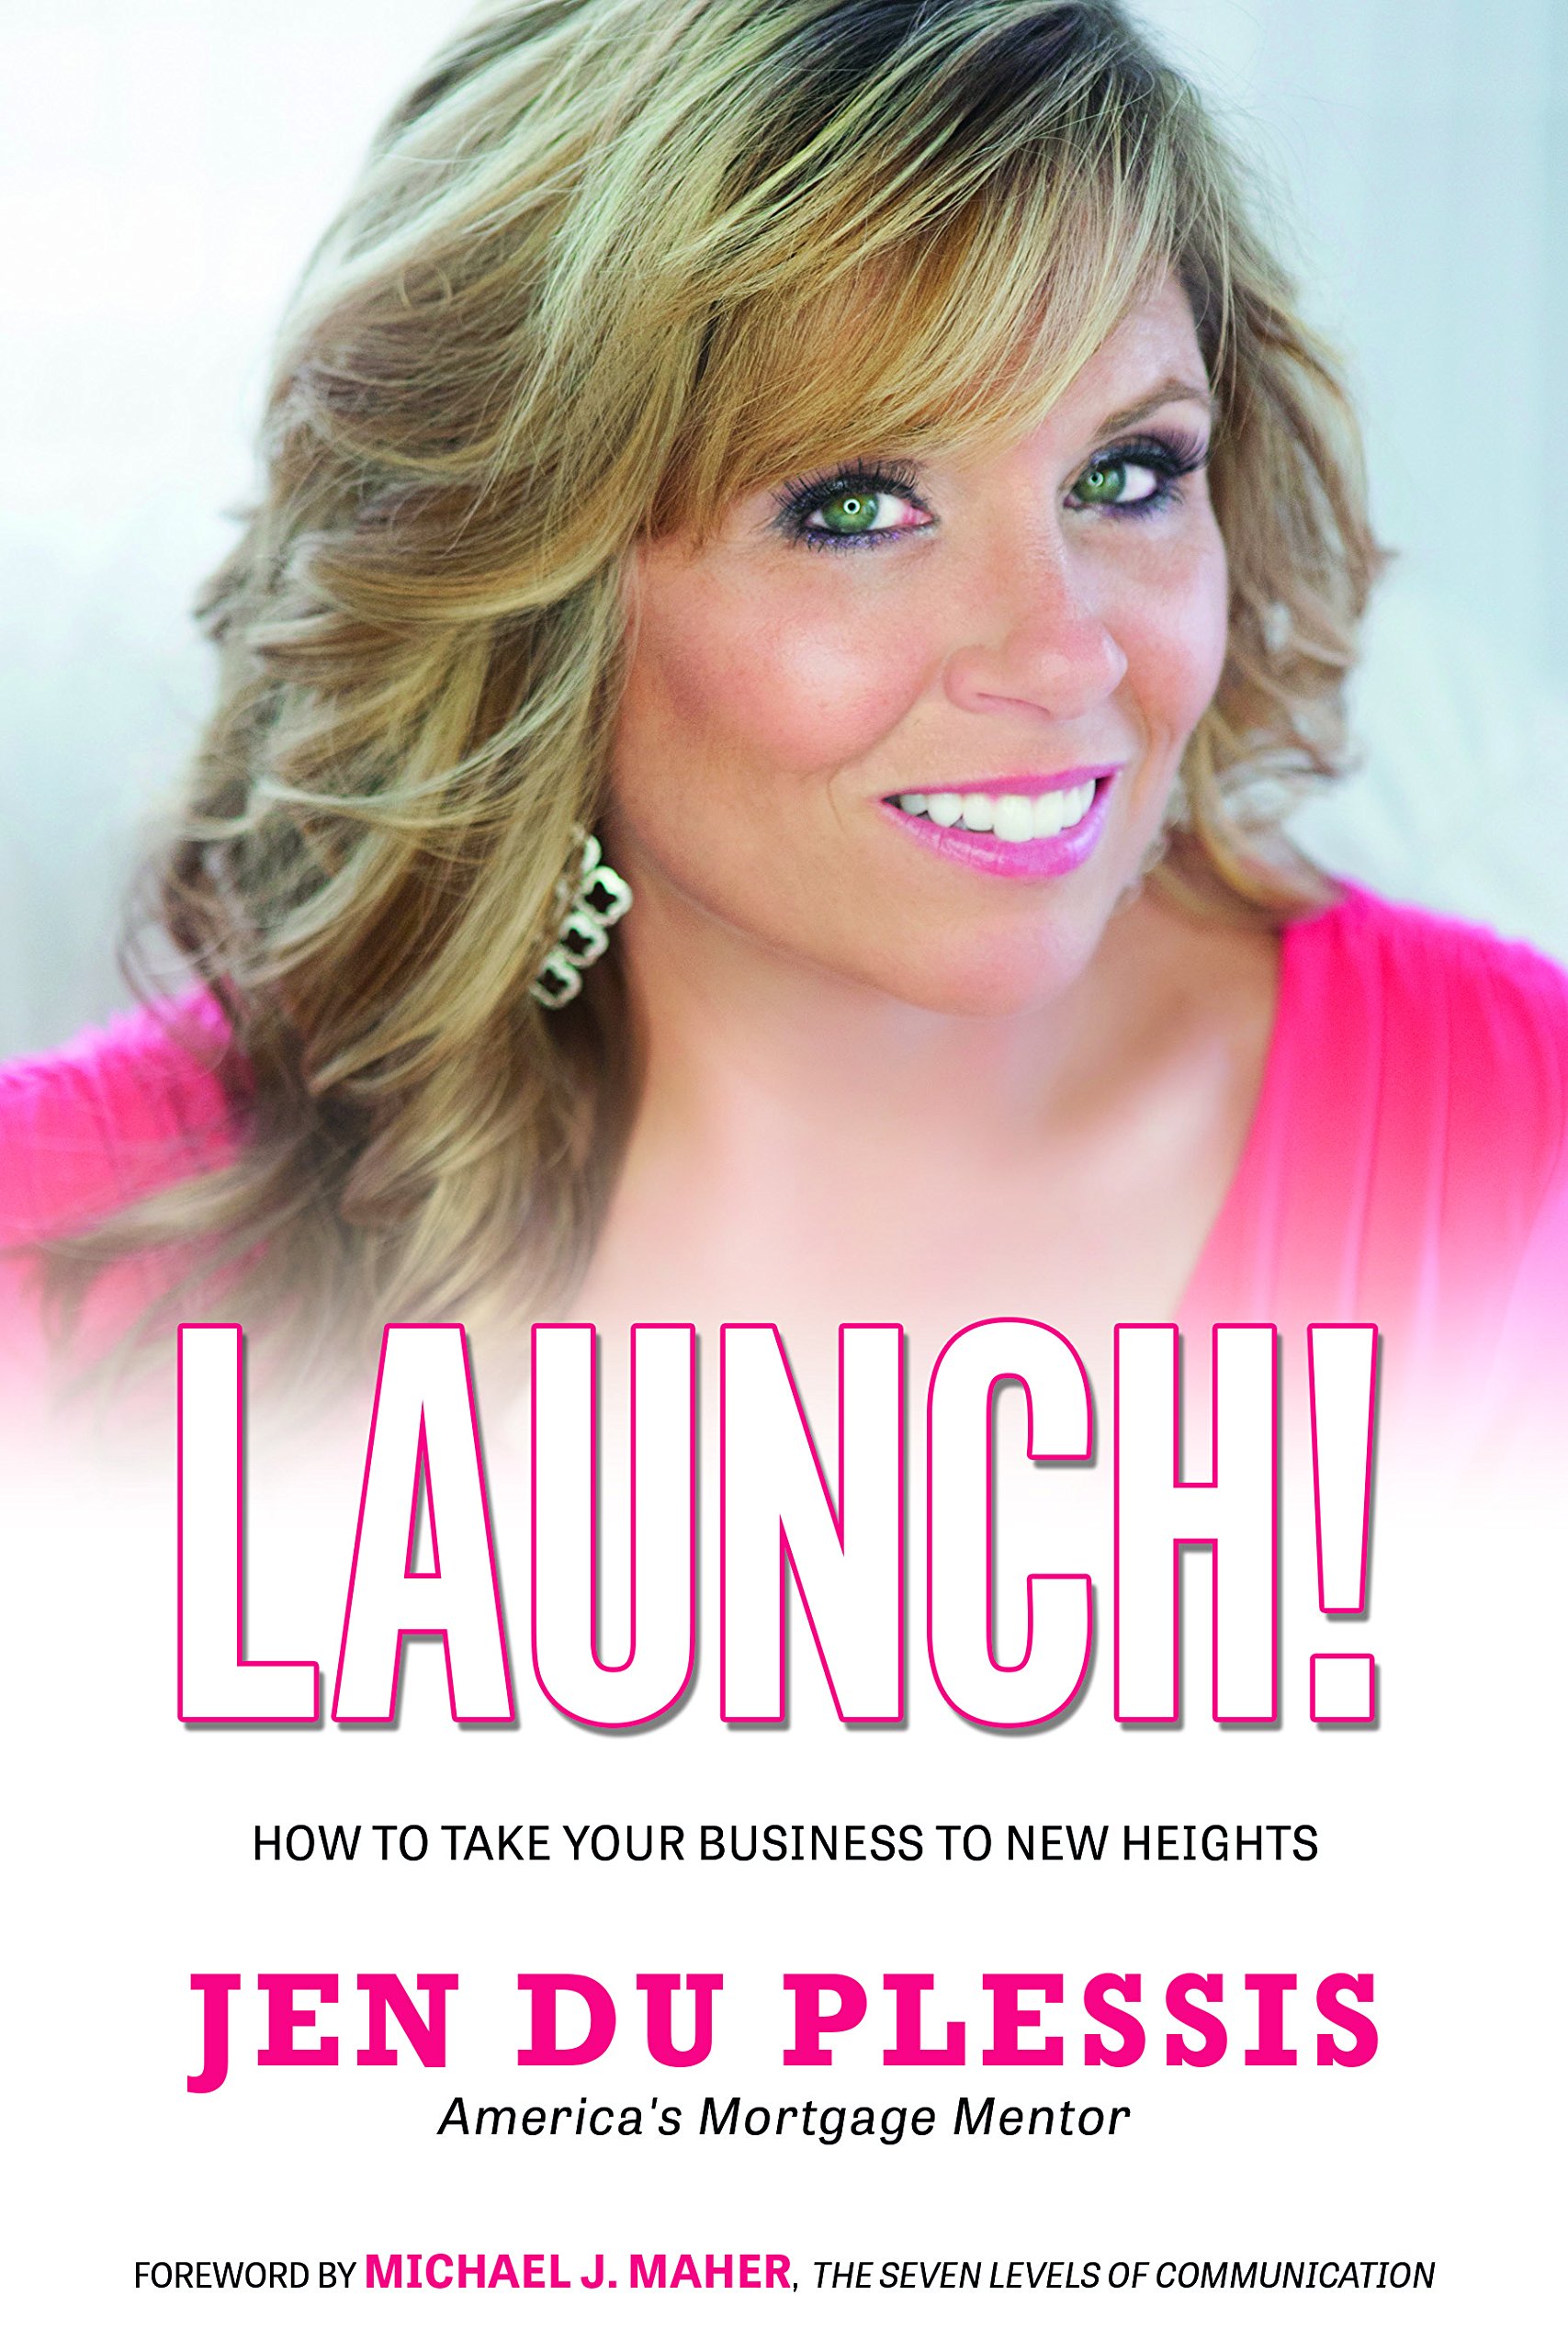 Mascot Books has announced the release of Launch!: How to Take Your Business to New Heights by mortgage industry veteran Jennifer Du Plessis